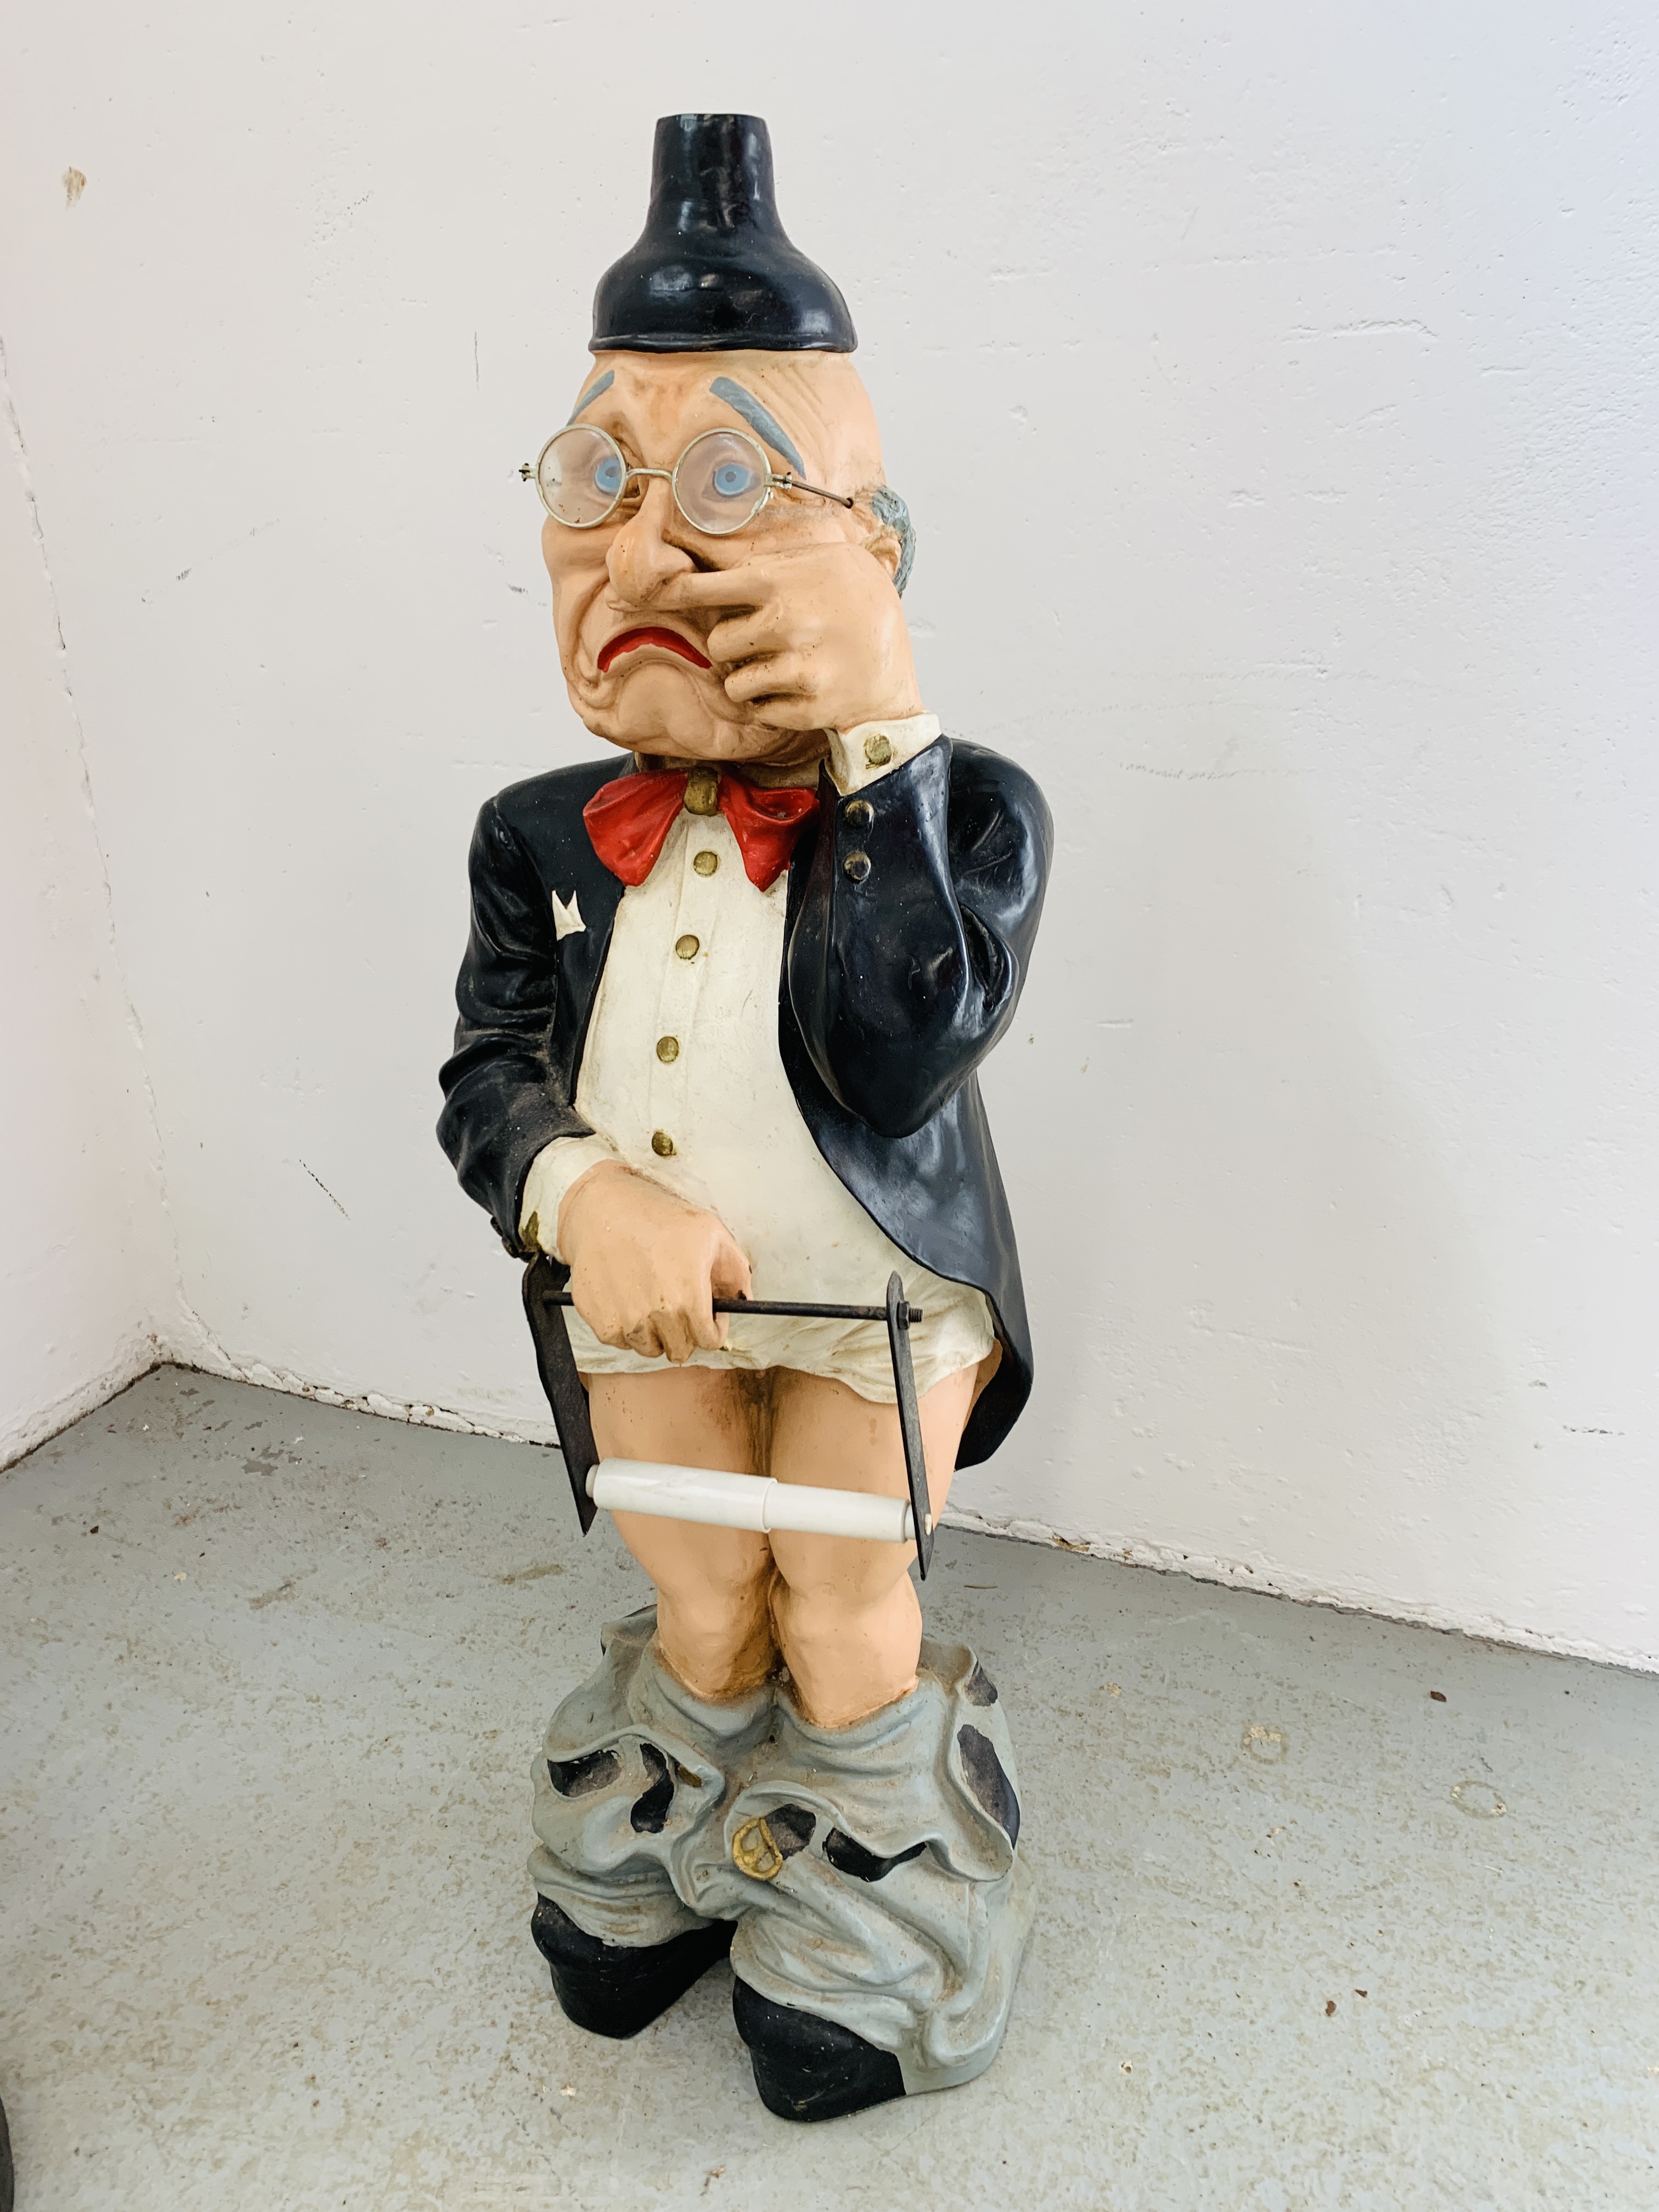 TWO NOVELTY RESIN TOILET ROLL HOLDING FIGURES "STAN LAUREL" AND WAITER HEIGHT 80CM. - Image 2 of 11